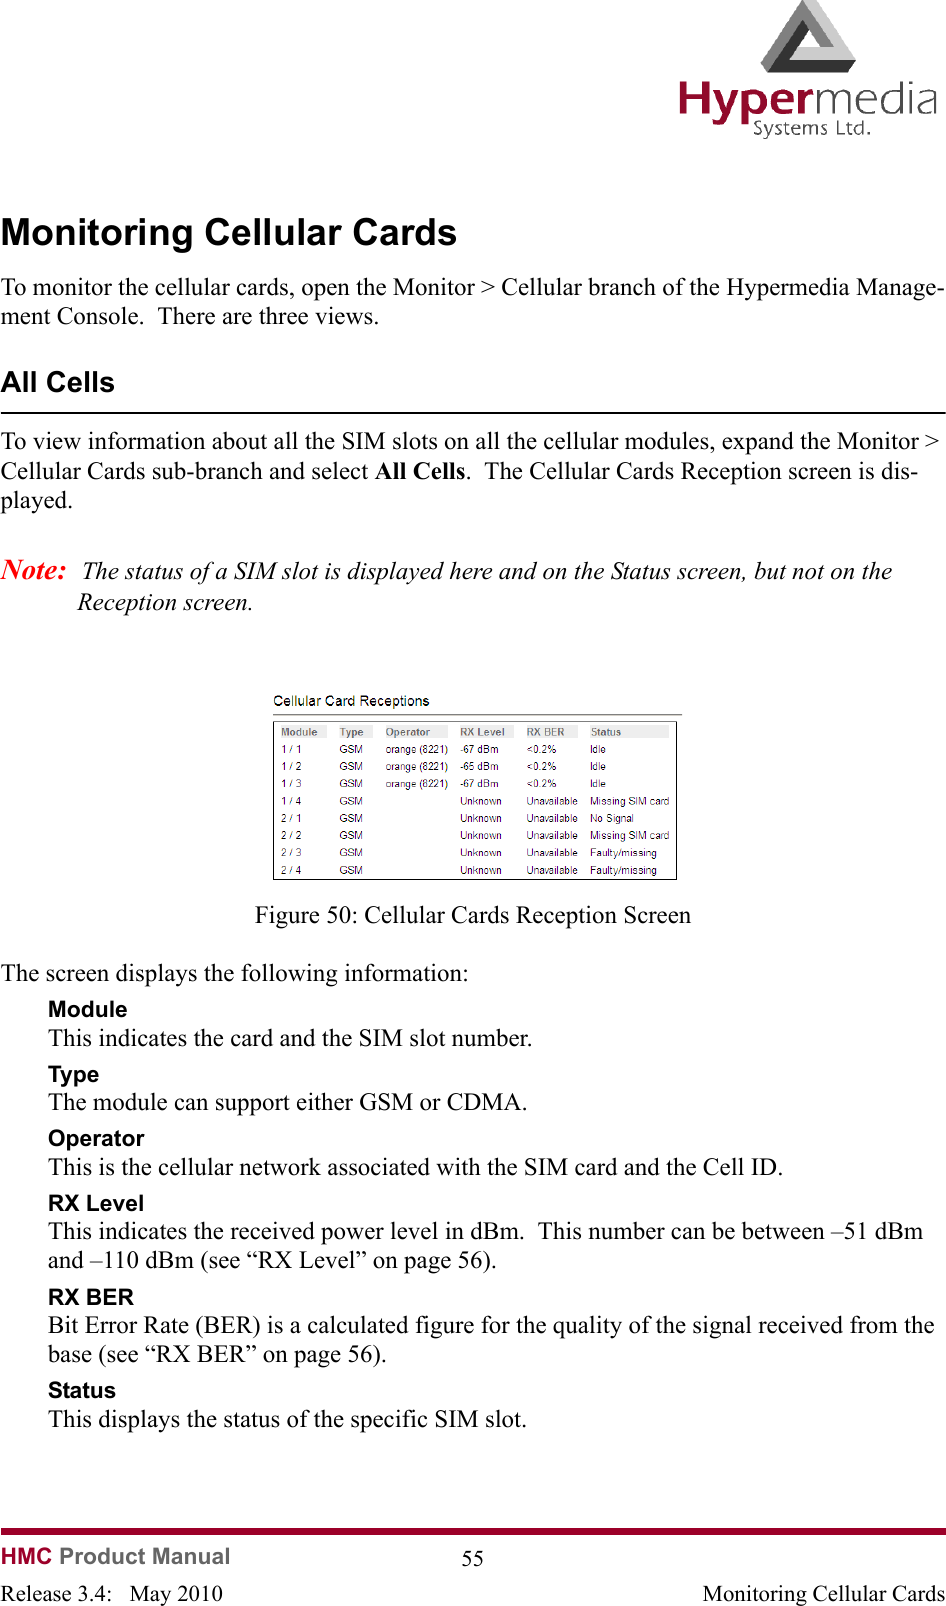 HMC Product Manual  55Release 3.4:   May 2010 Monitoring Cellular CardsMonitoring Cellular CardsTo monitor the cellular cards, open the Monitor &gt; Cellular branch of the Hypermedia Manage-ment Console.  There are three views.All CellsTo view information about all the SIM slots on all the cellular modules, expand the Monitor &gt; Cellular Cards sub-branch and select All Cells.  The Cellular Cards Reception screen is dis-played.Note:  The status of a SIM slot is displayed here and on the Status screen, but not on the Reception screen.              Figure 50: Cellular Cards Reception ScreenThe screen displays the following information:ModuleThis indicates the card and the SIM slot number.TypeThe module can support either GSM or CDMA.OperatorThis is the cellular network associated with the SIM card and the Cell ID.RX LevelThis indicates the received power level in dBm.  This number can be between –51 dBm and –110 dBm (see “RX Level” on page 56).RX BERBit Error Rate (BER) is a calculated figure for the quality of the signal received from the base (see “RX BER” on page 56).StatusThis displays the status of the specific SIM slot.